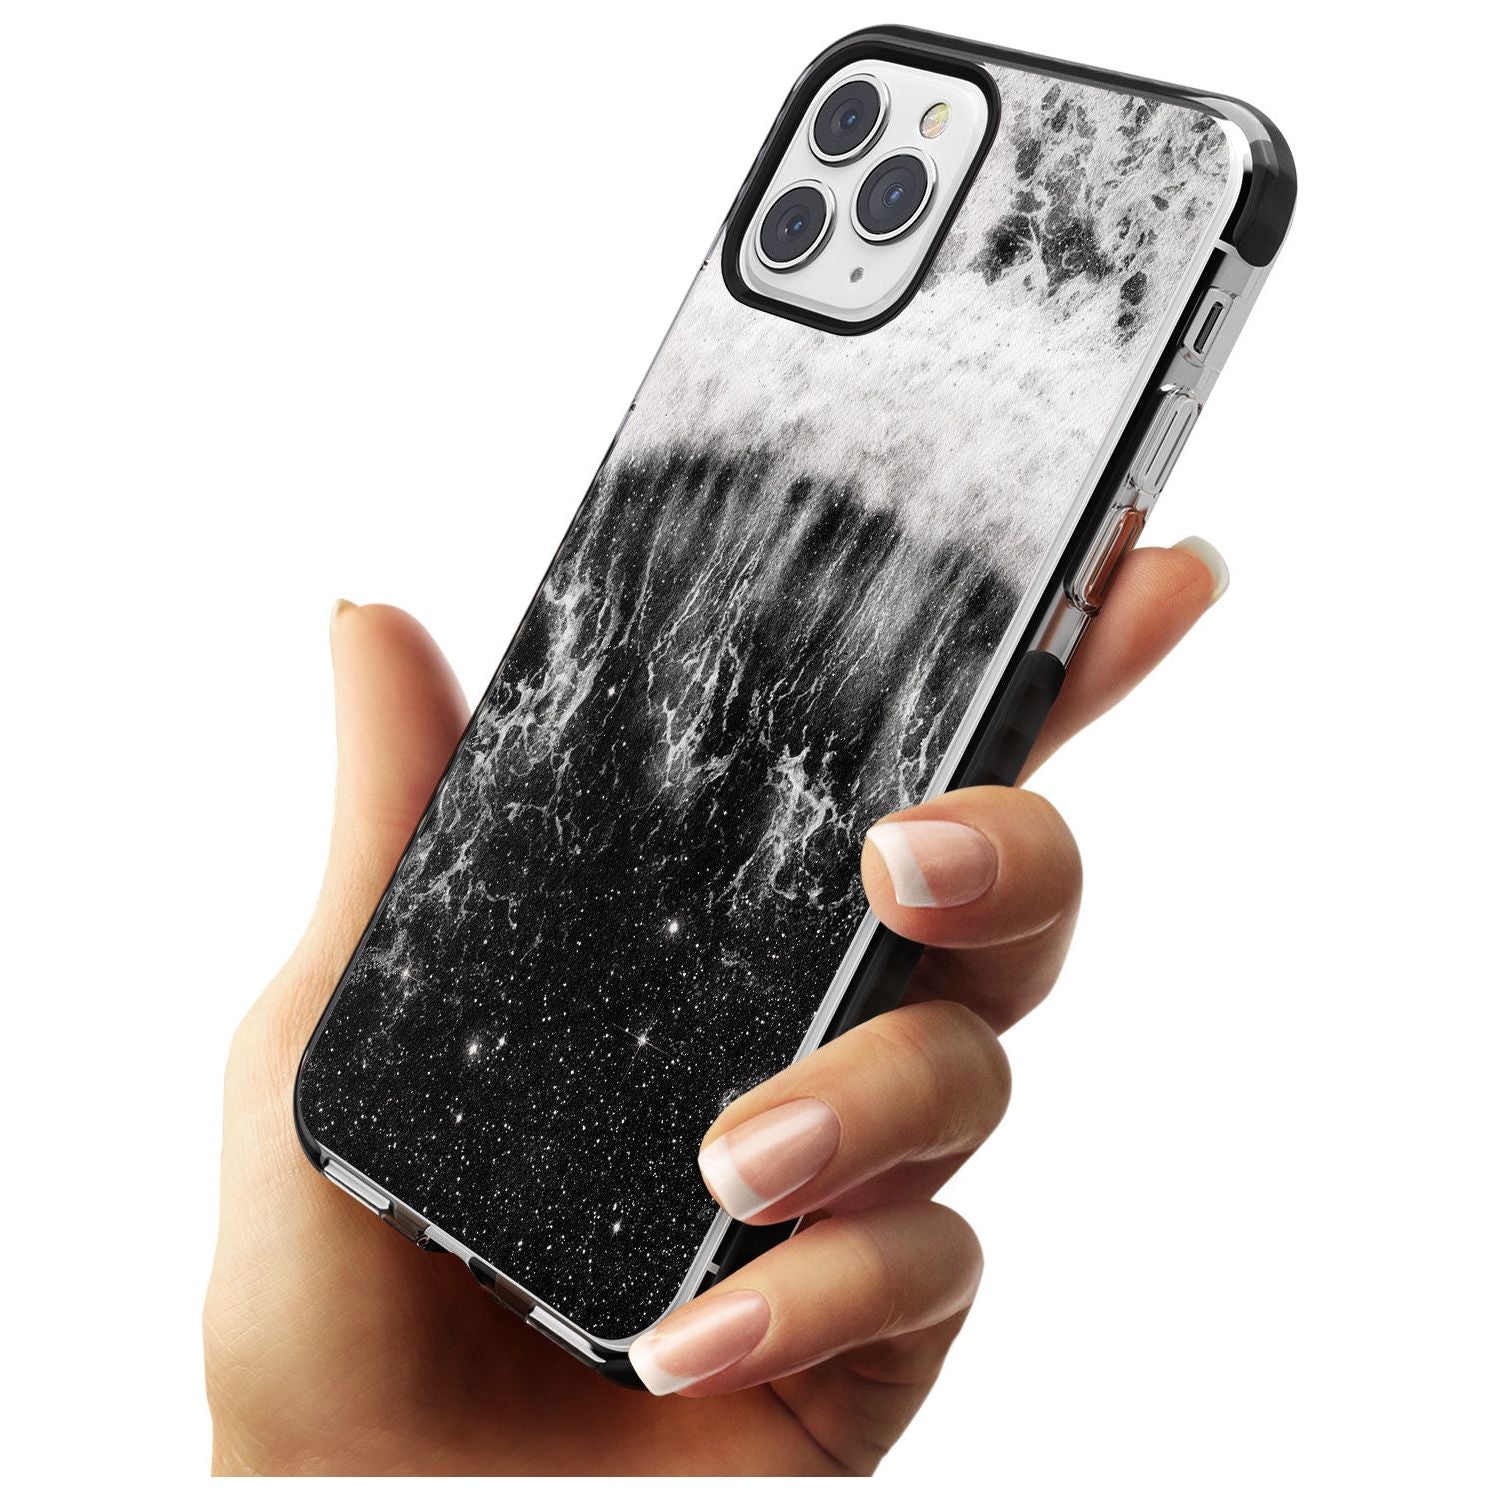 Ocean Wave Galaxy Print Black Impact Phone Case for iPhone 11 Pro Max